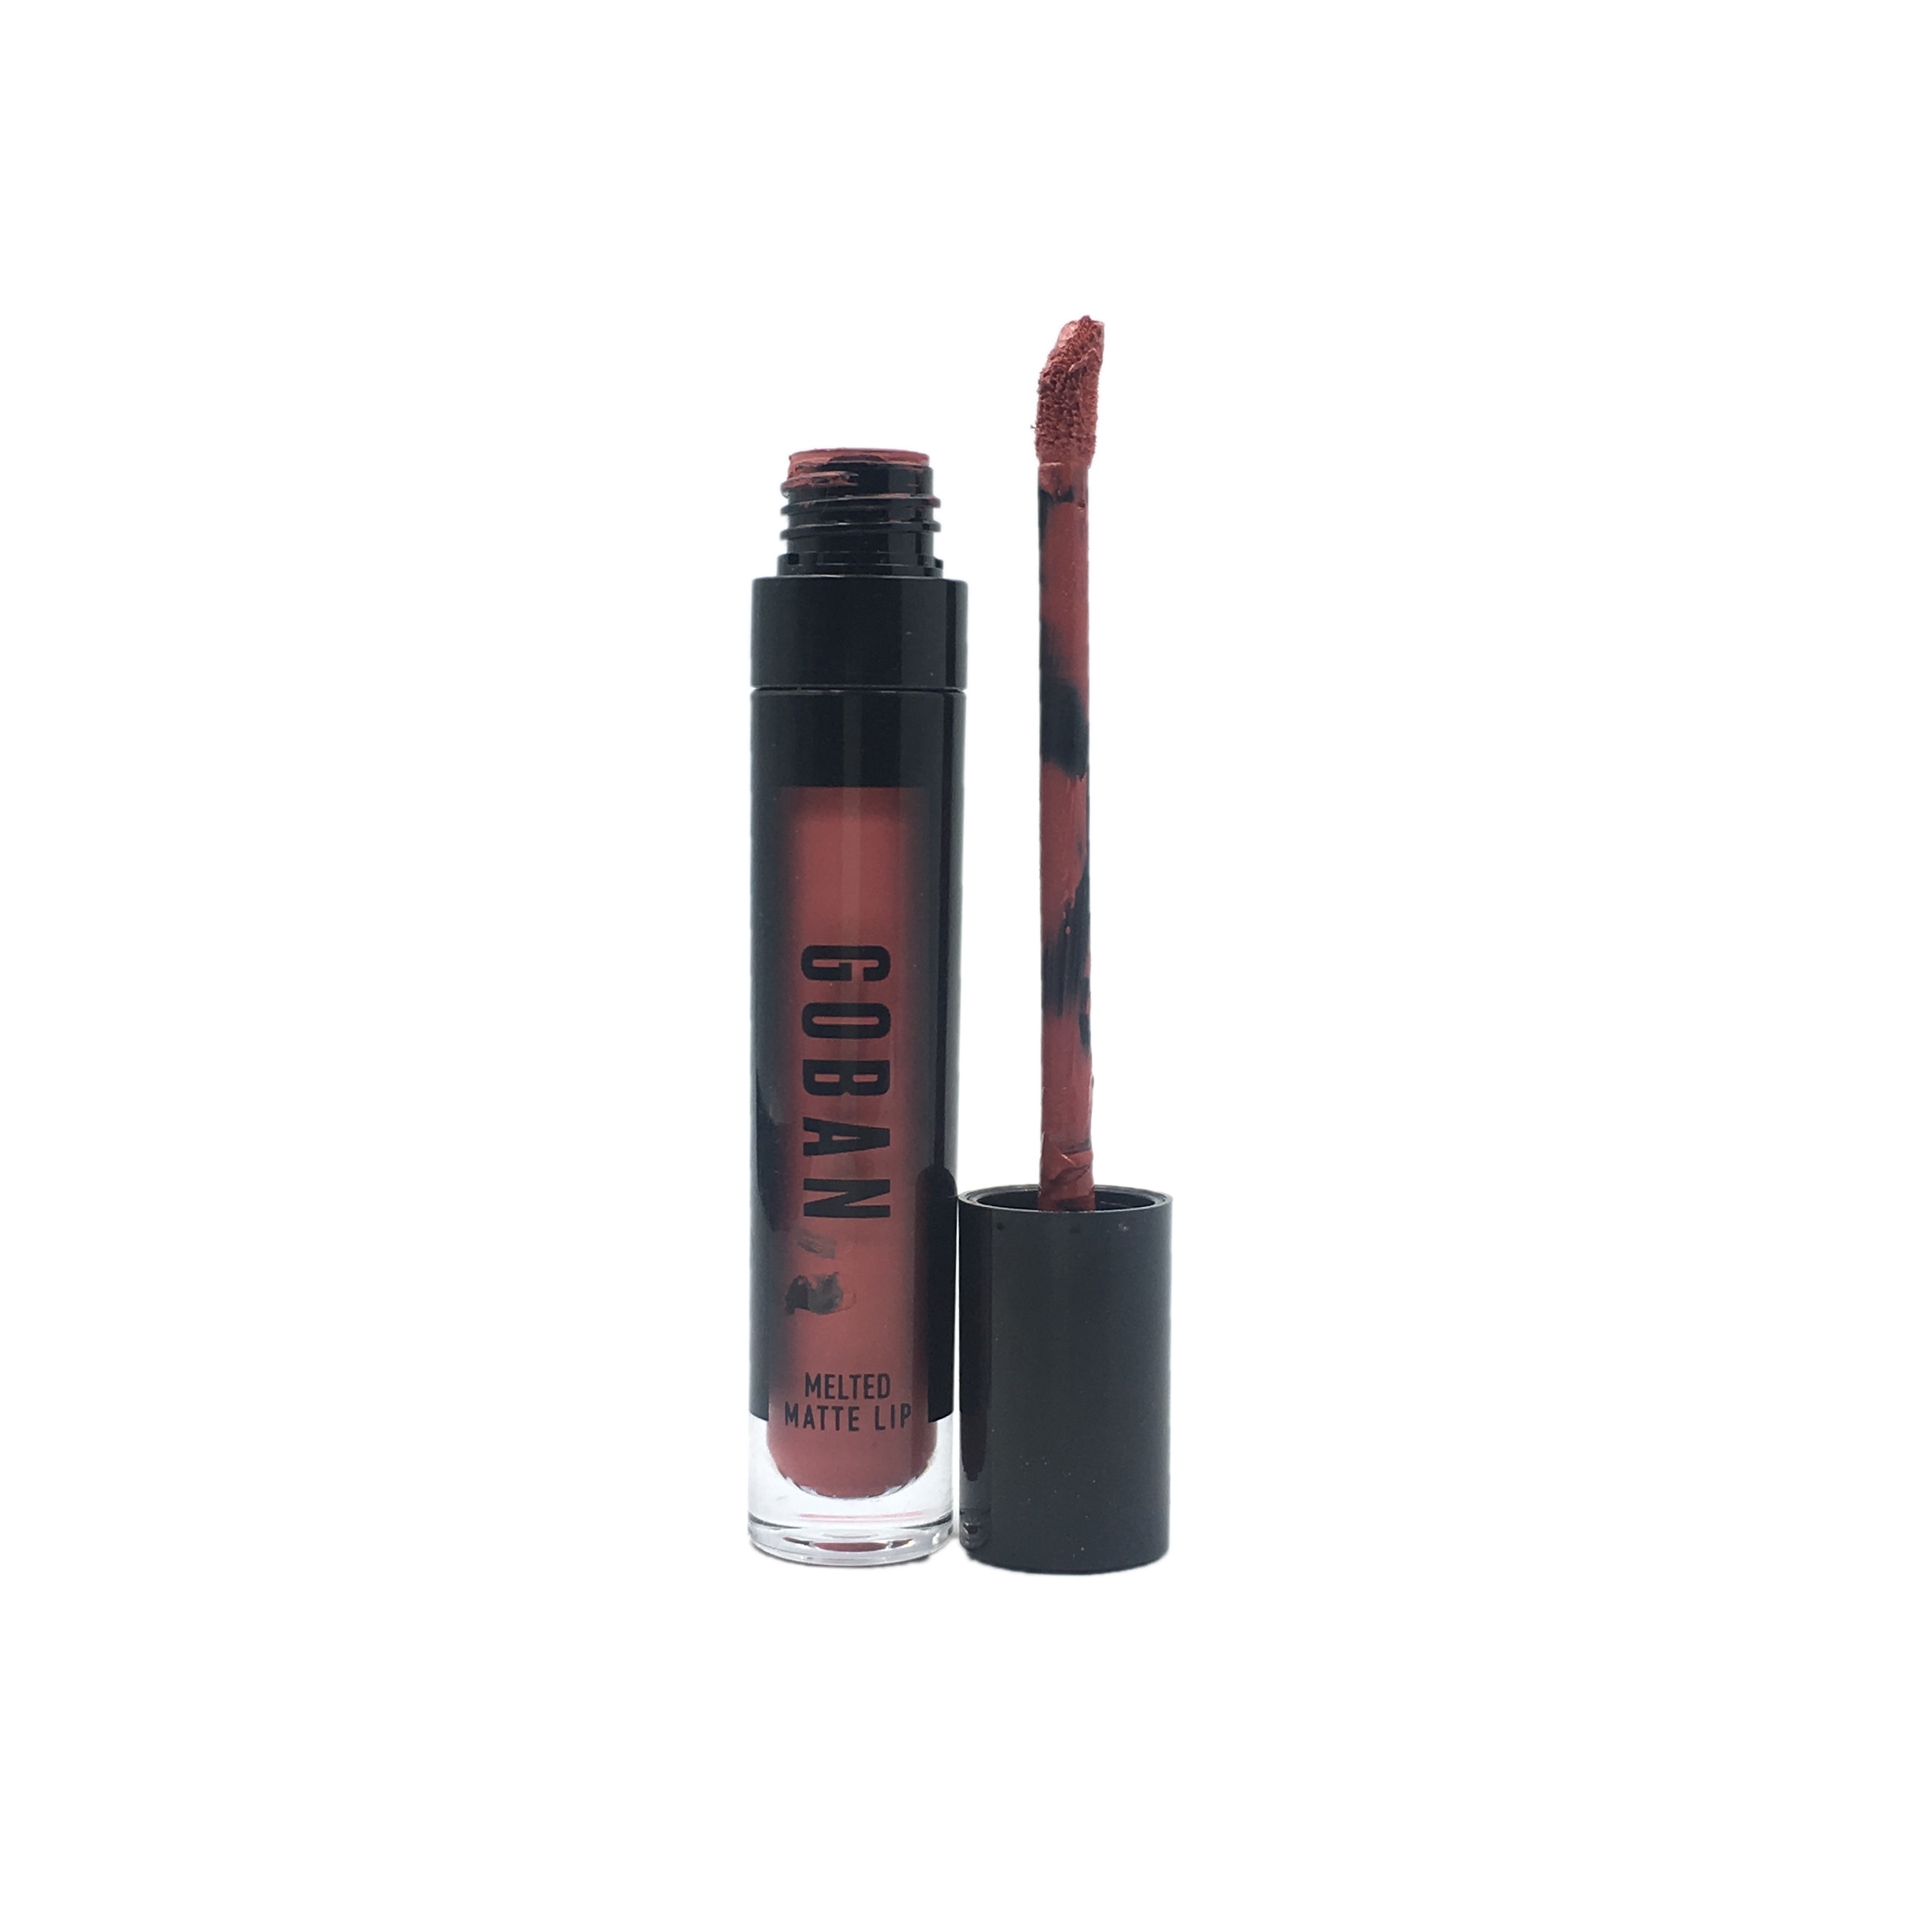 Goban Melted Matte Lip Butterfly 004 Lips